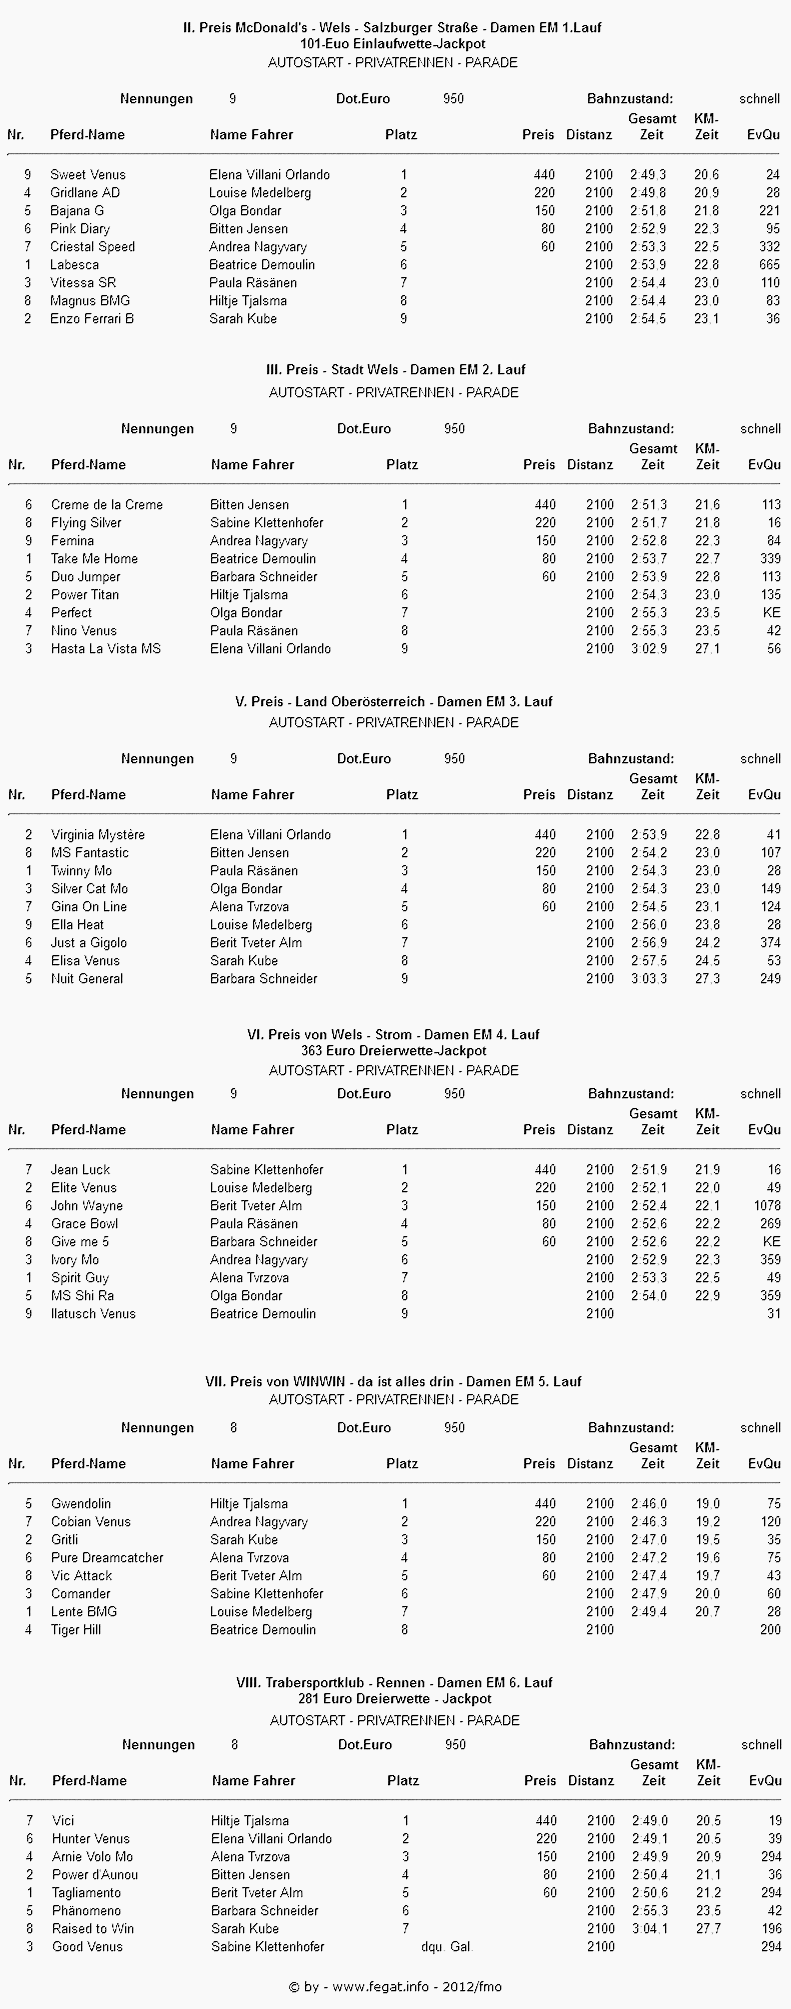 Race results